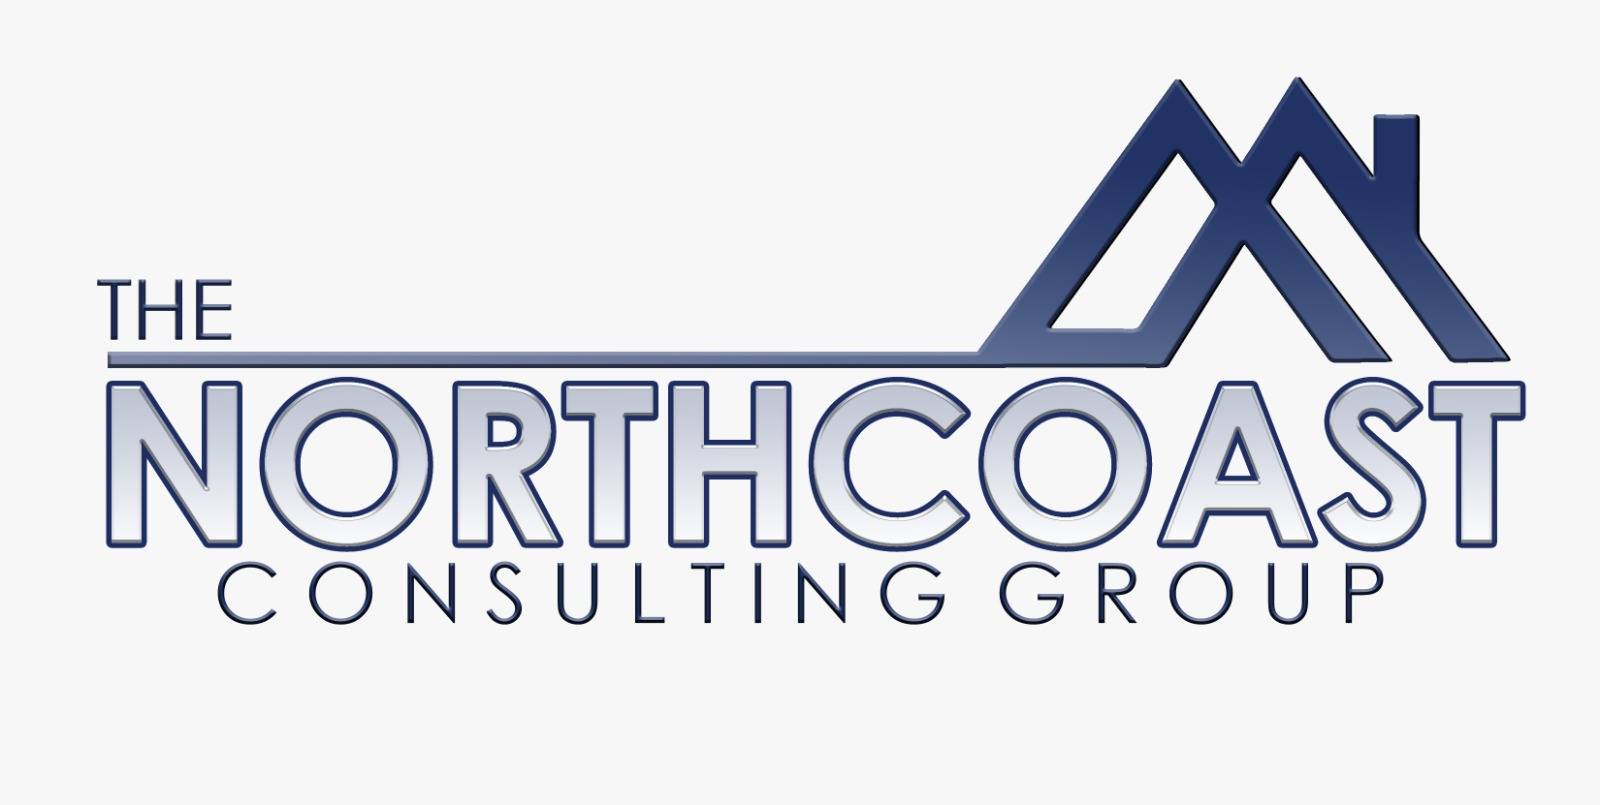 The Northcoast Consulting Group Logo